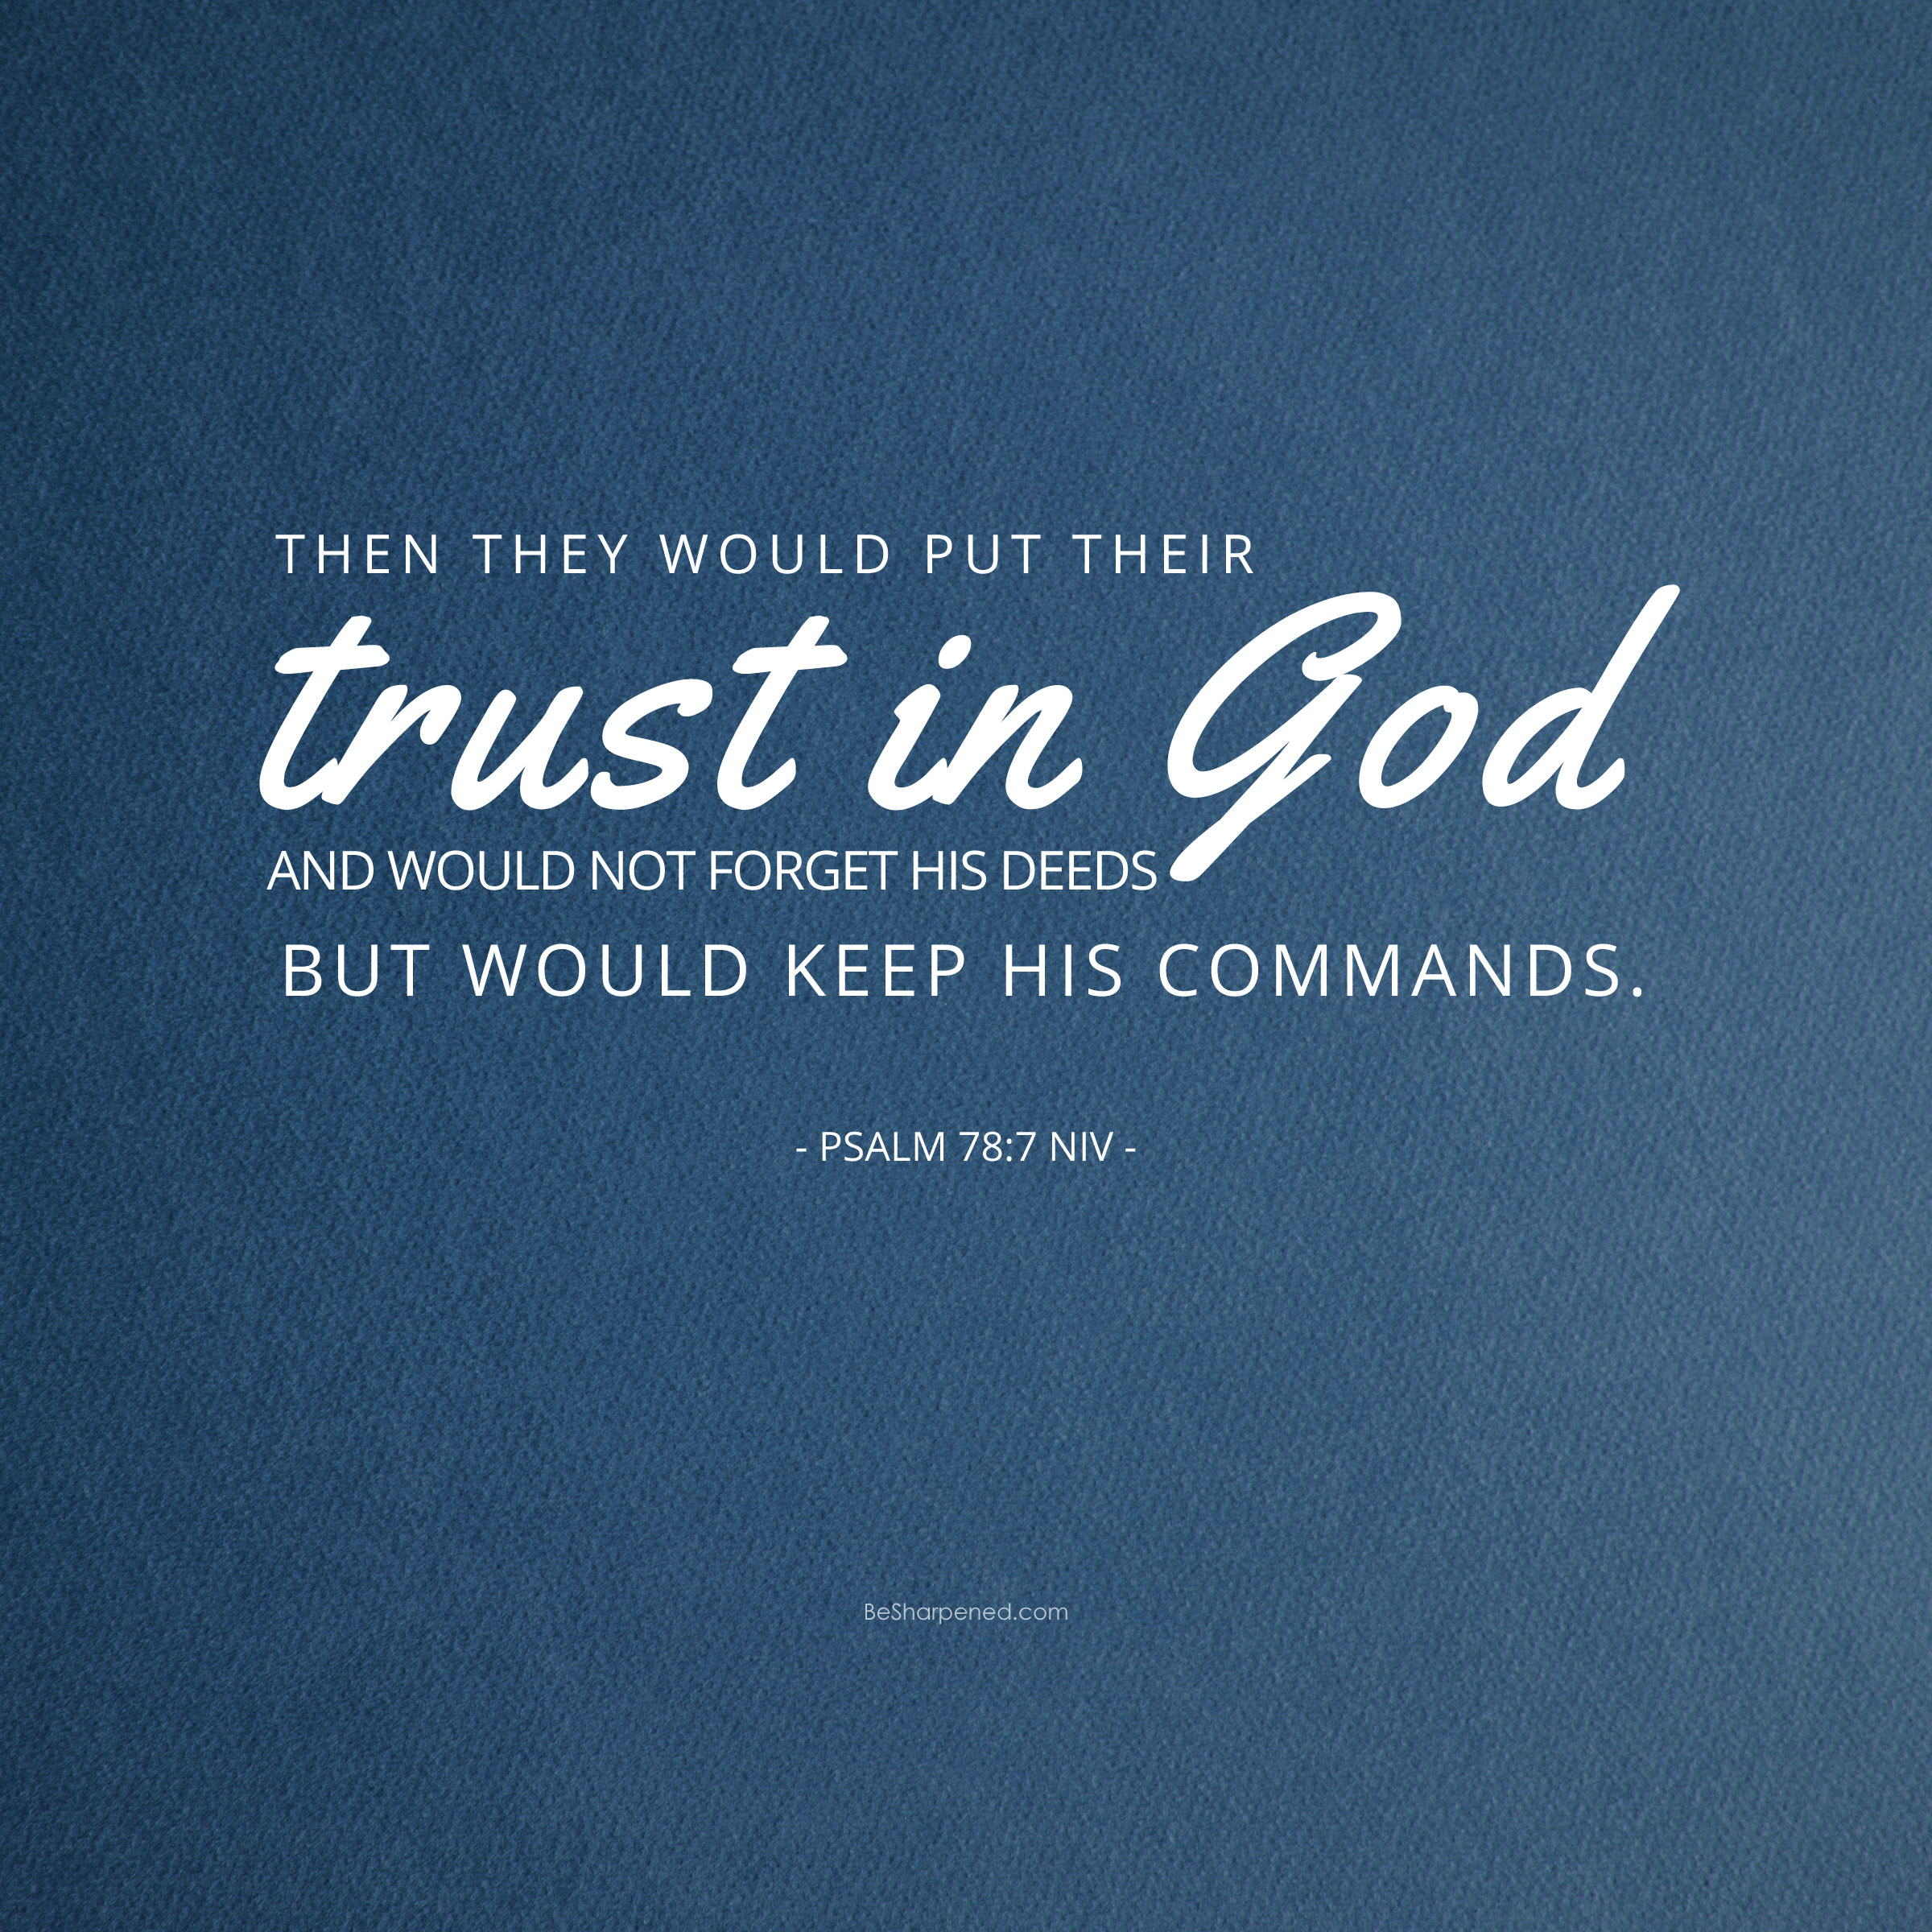 psalm 78:7 - trust and obey God